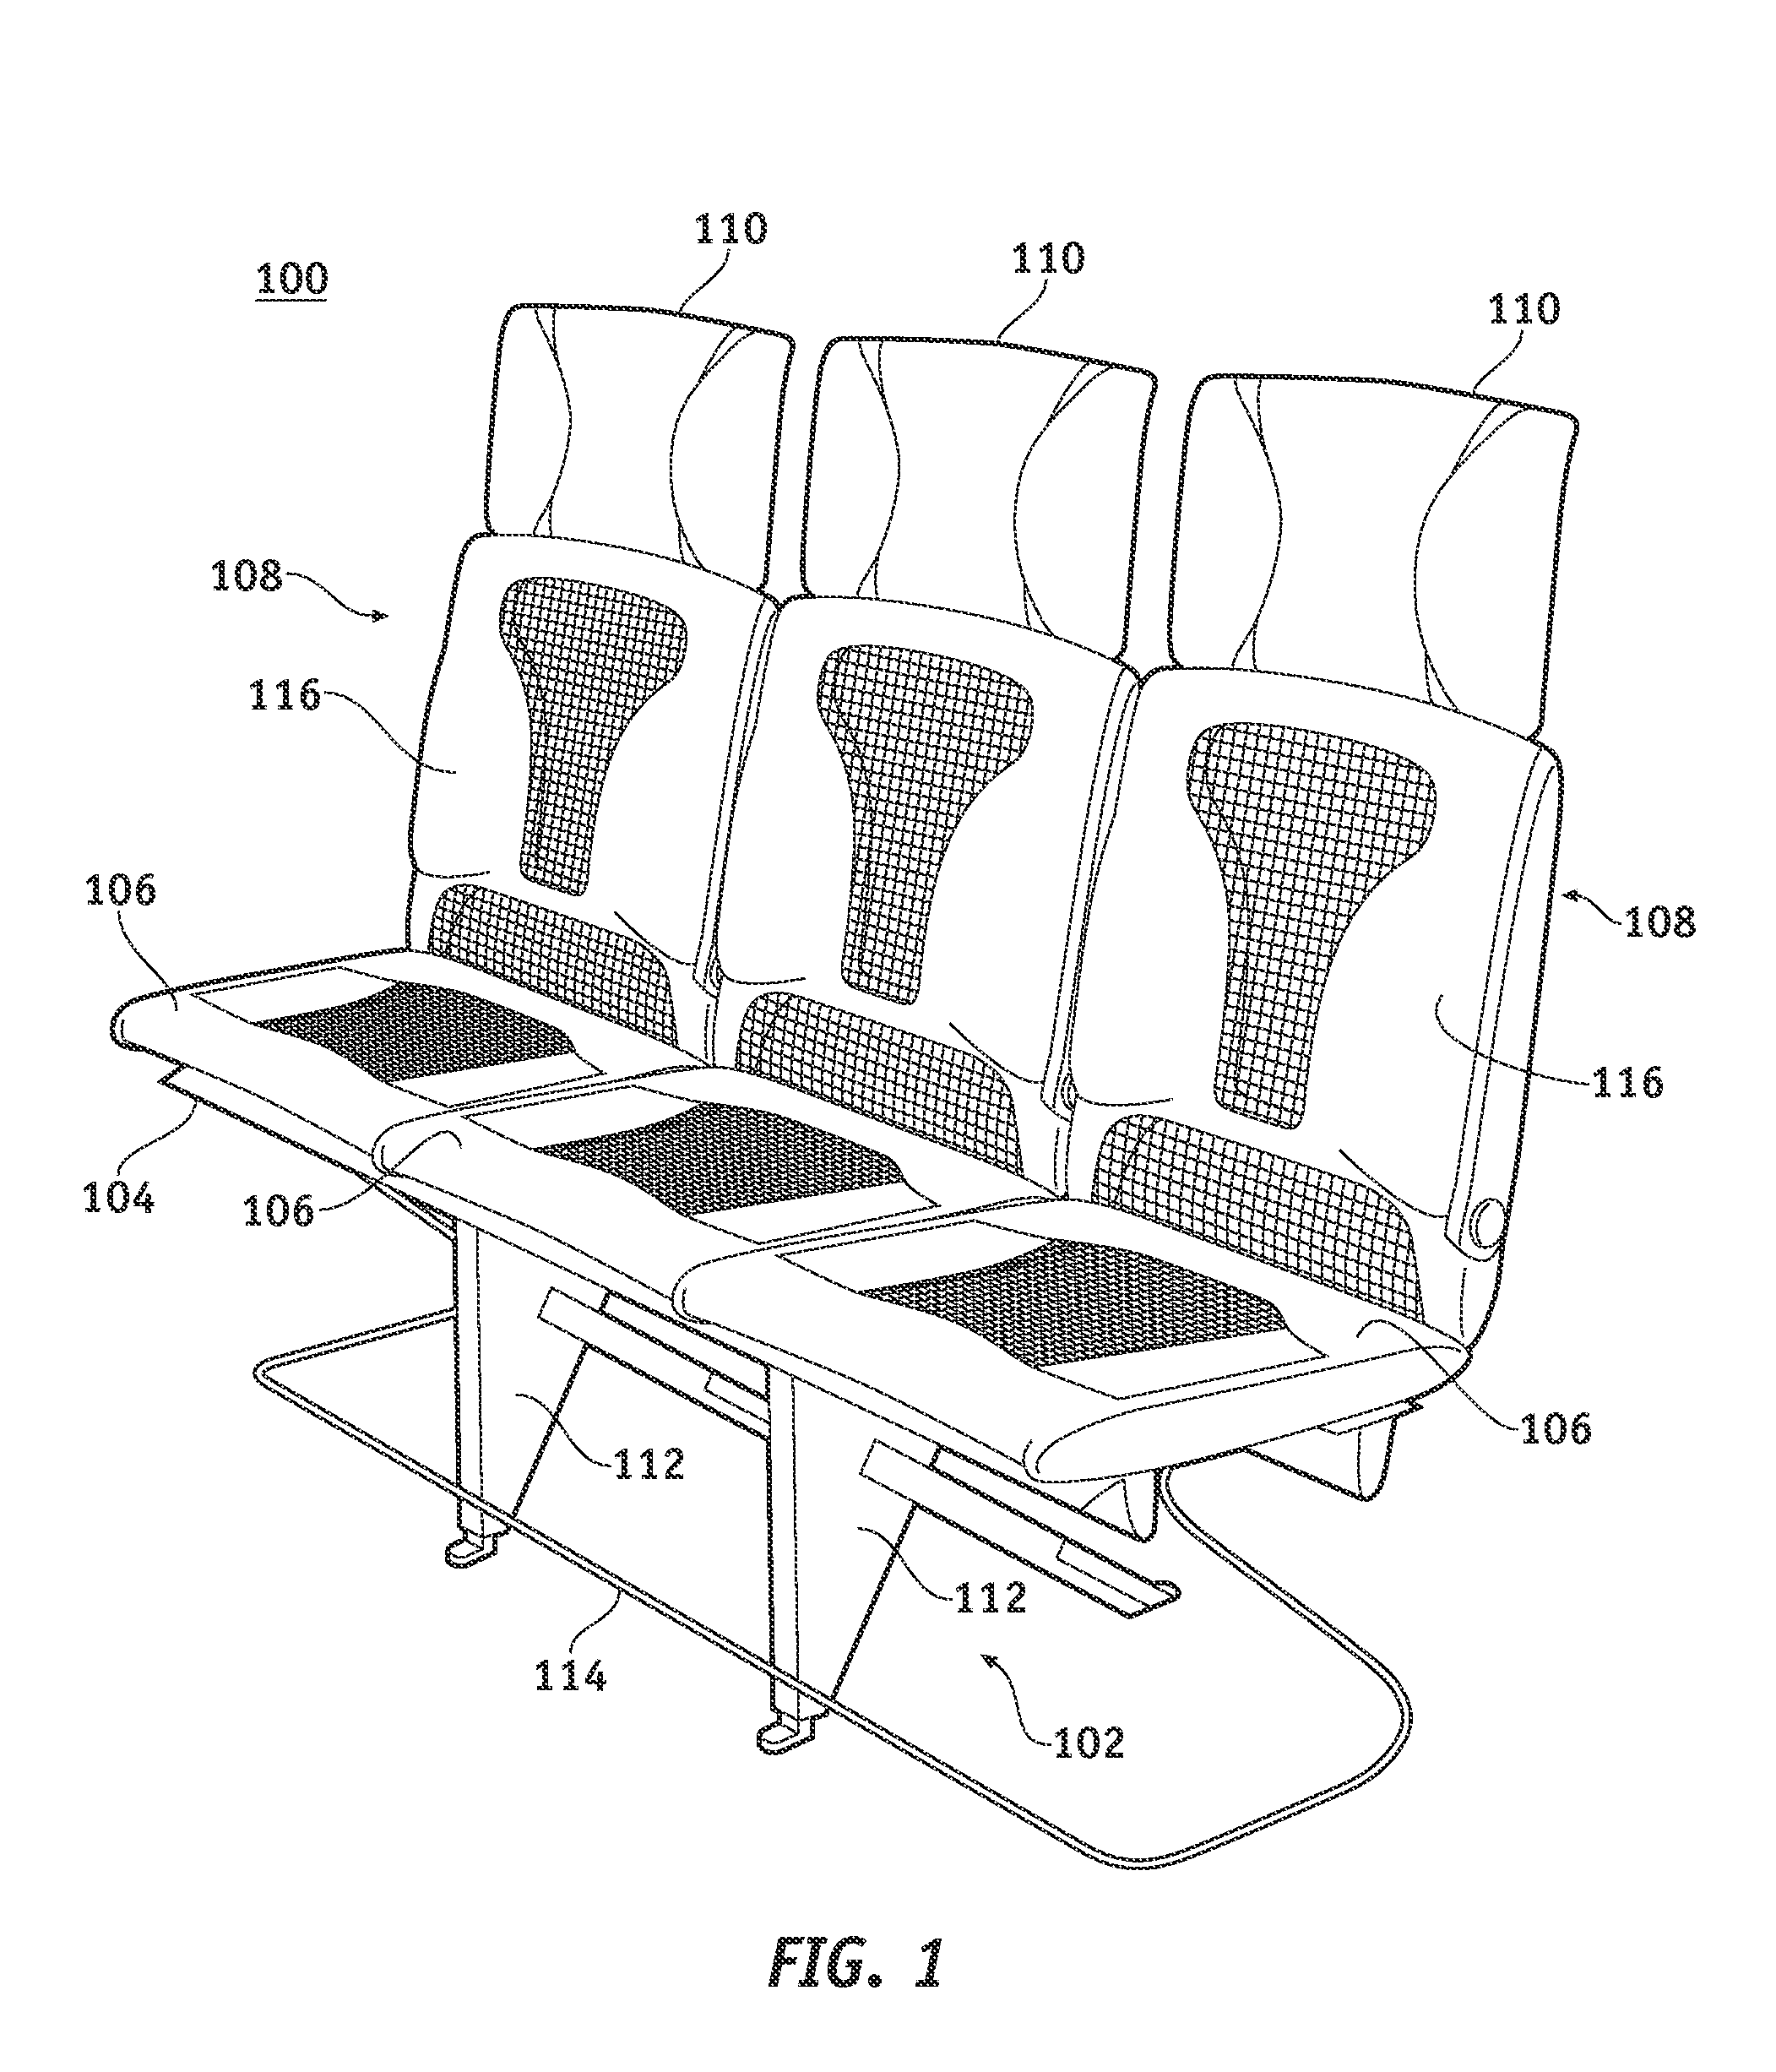 Composite leg structure for a lightweight aircraft seat assembly